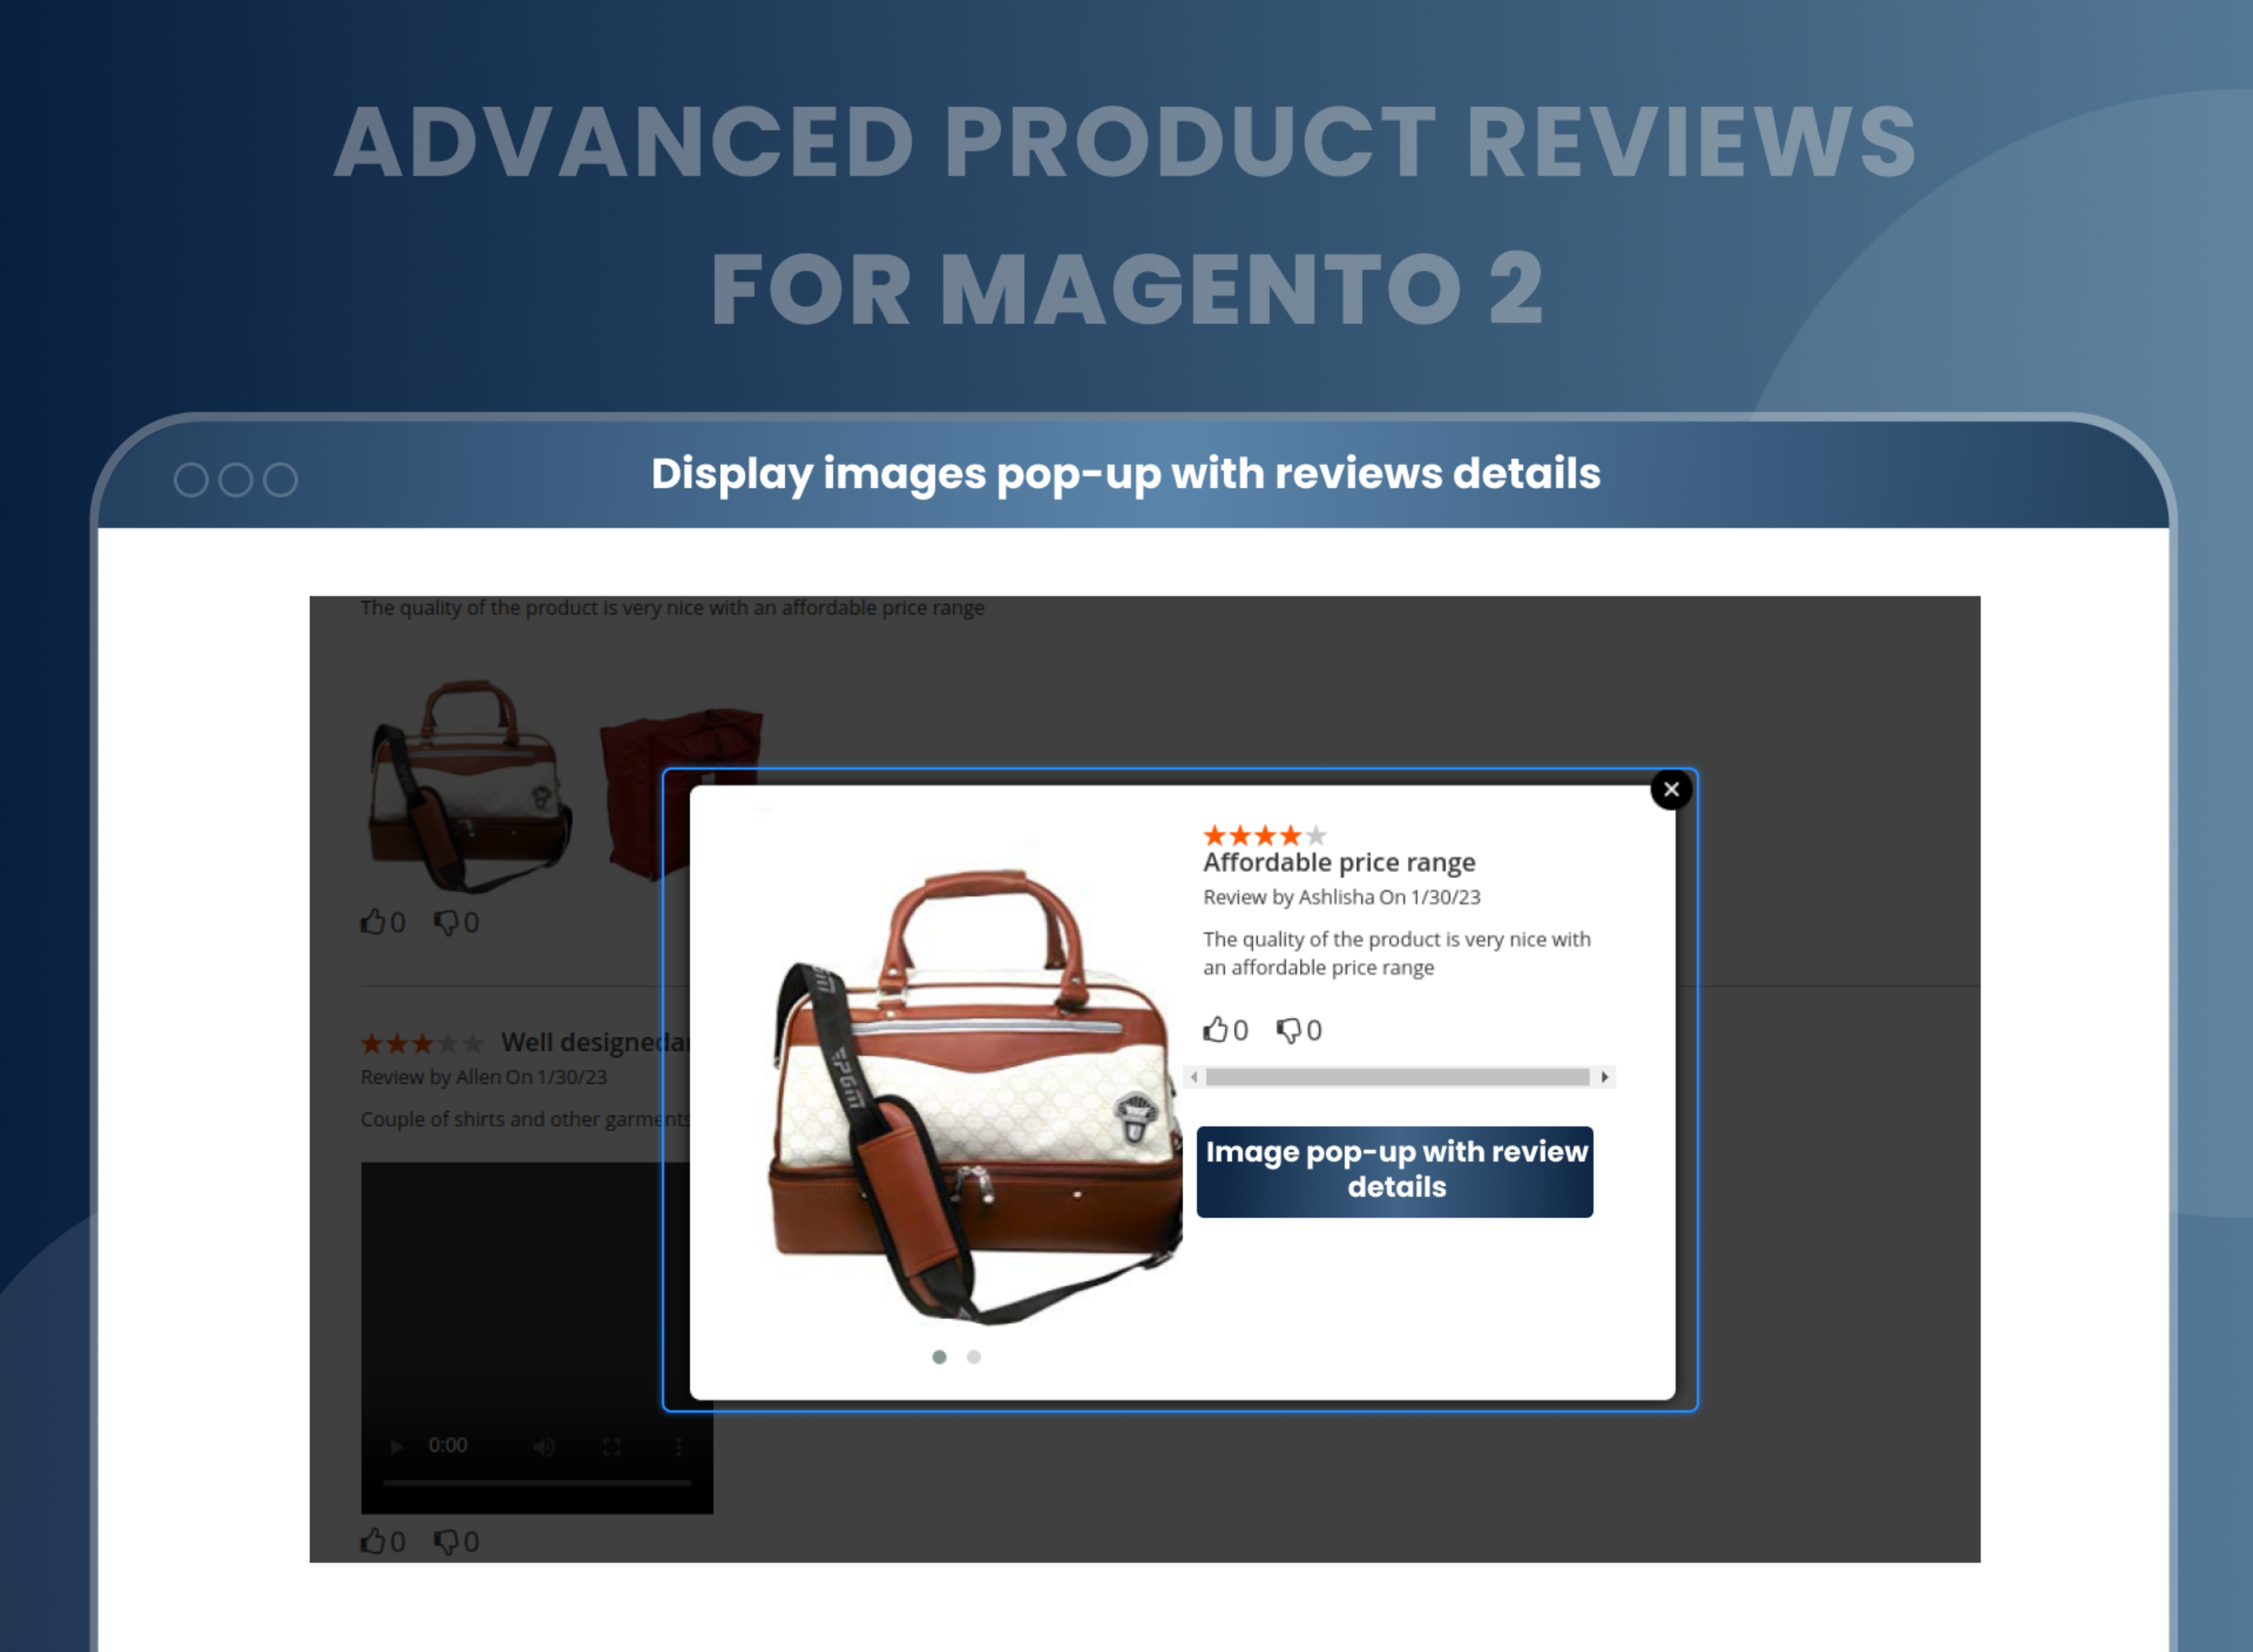 Display images pop-up with reviews details